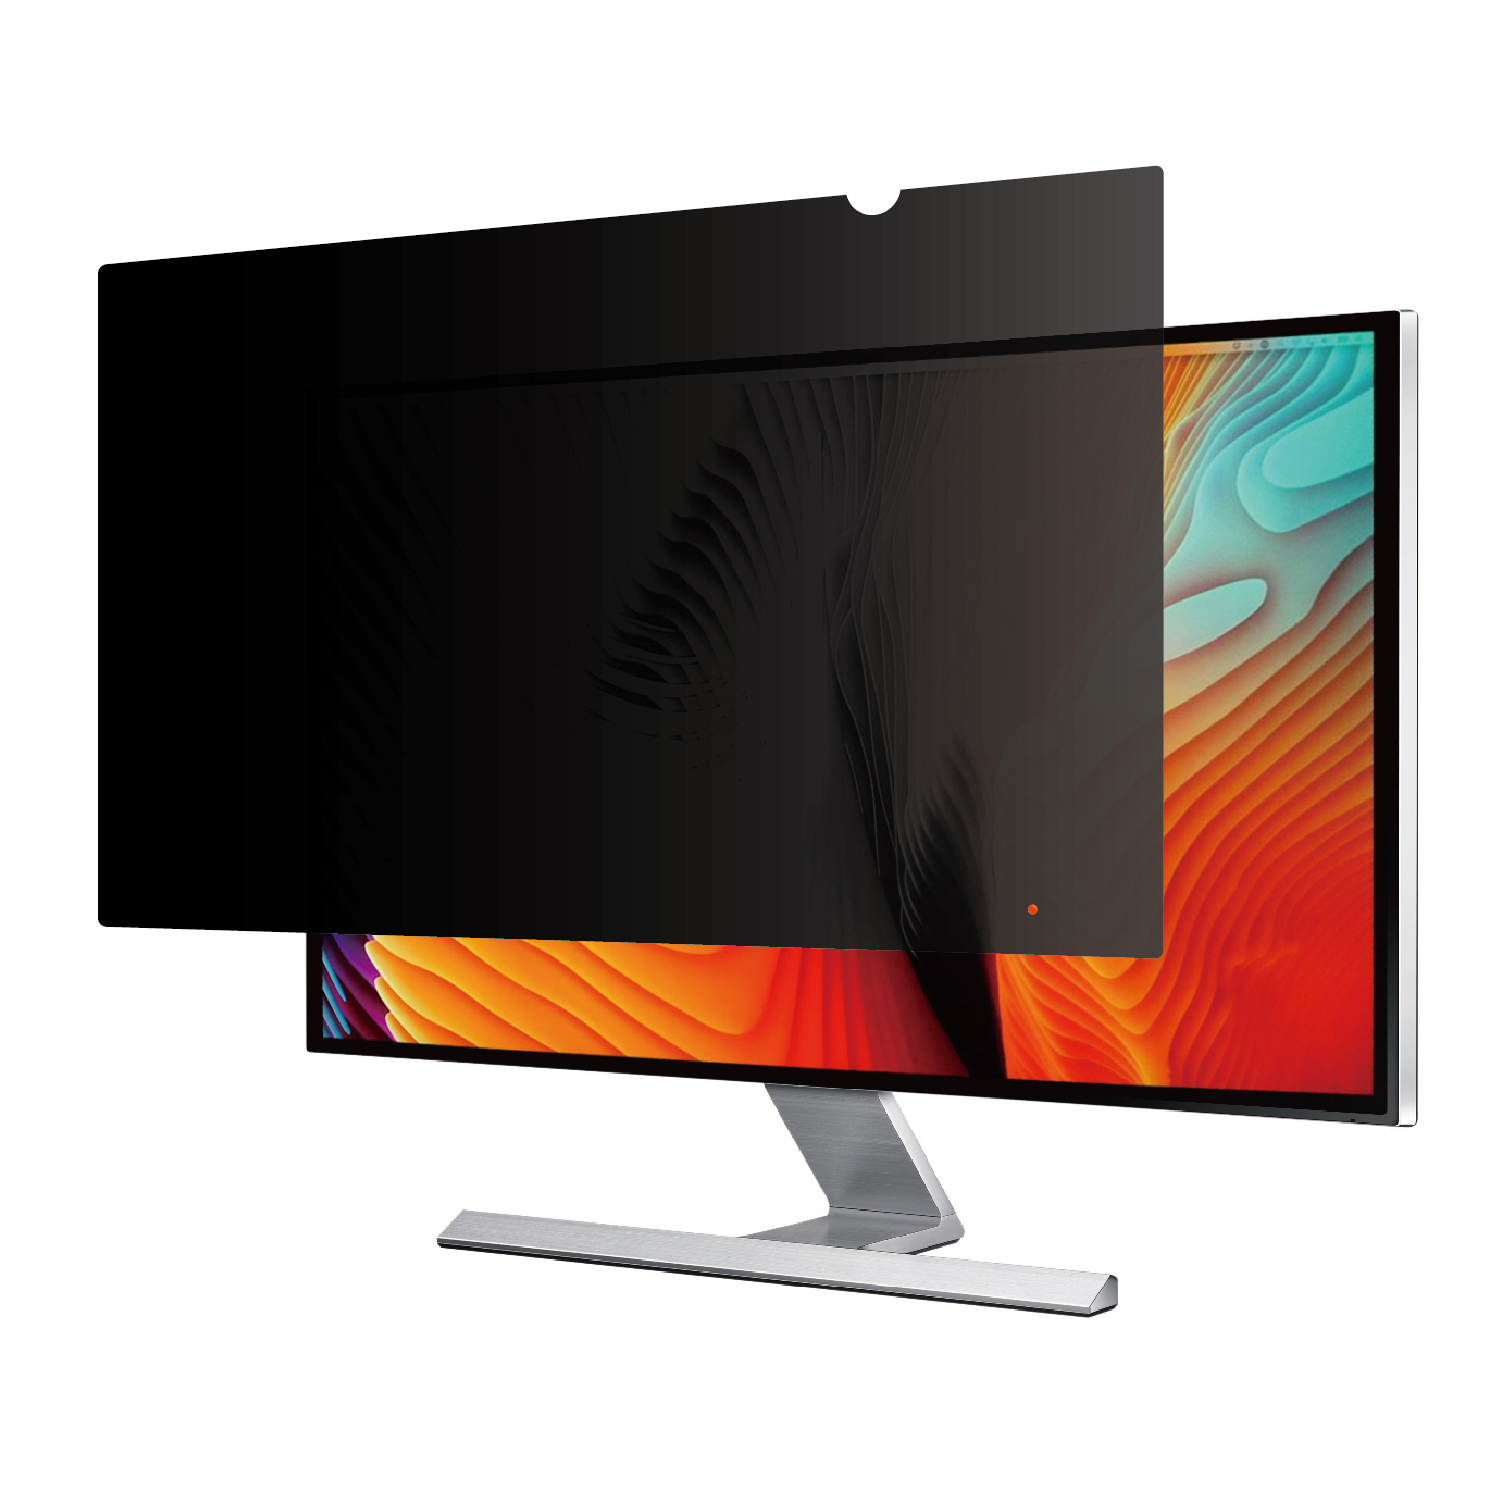 screen protector for monitor